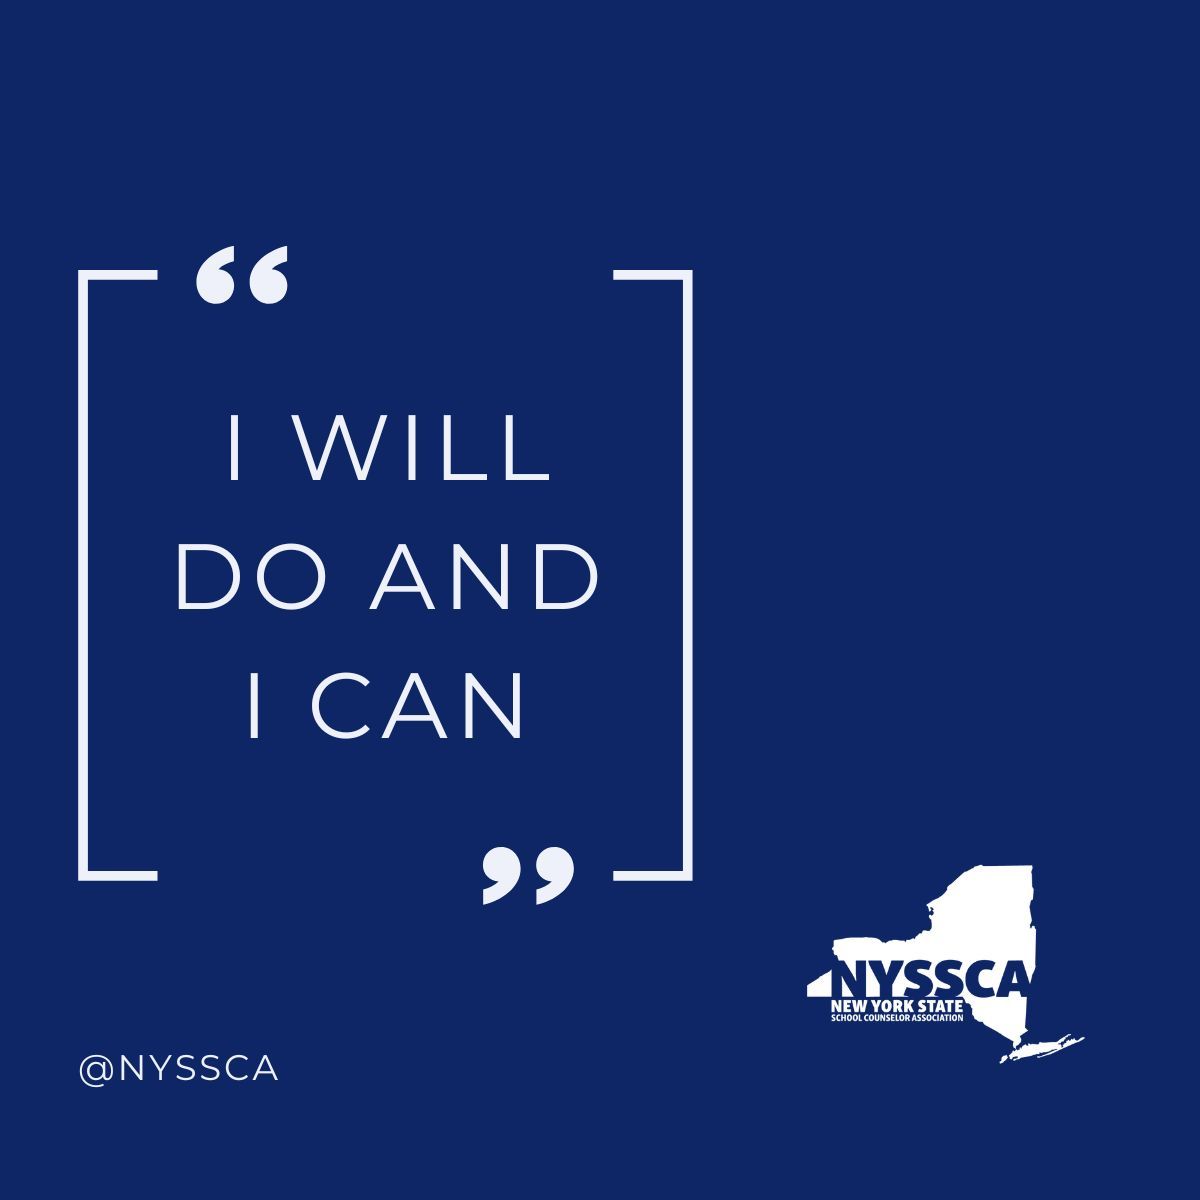 #IWill #ICan #NYSSCA #SchoolCounselor #Motivation #Education #Positive